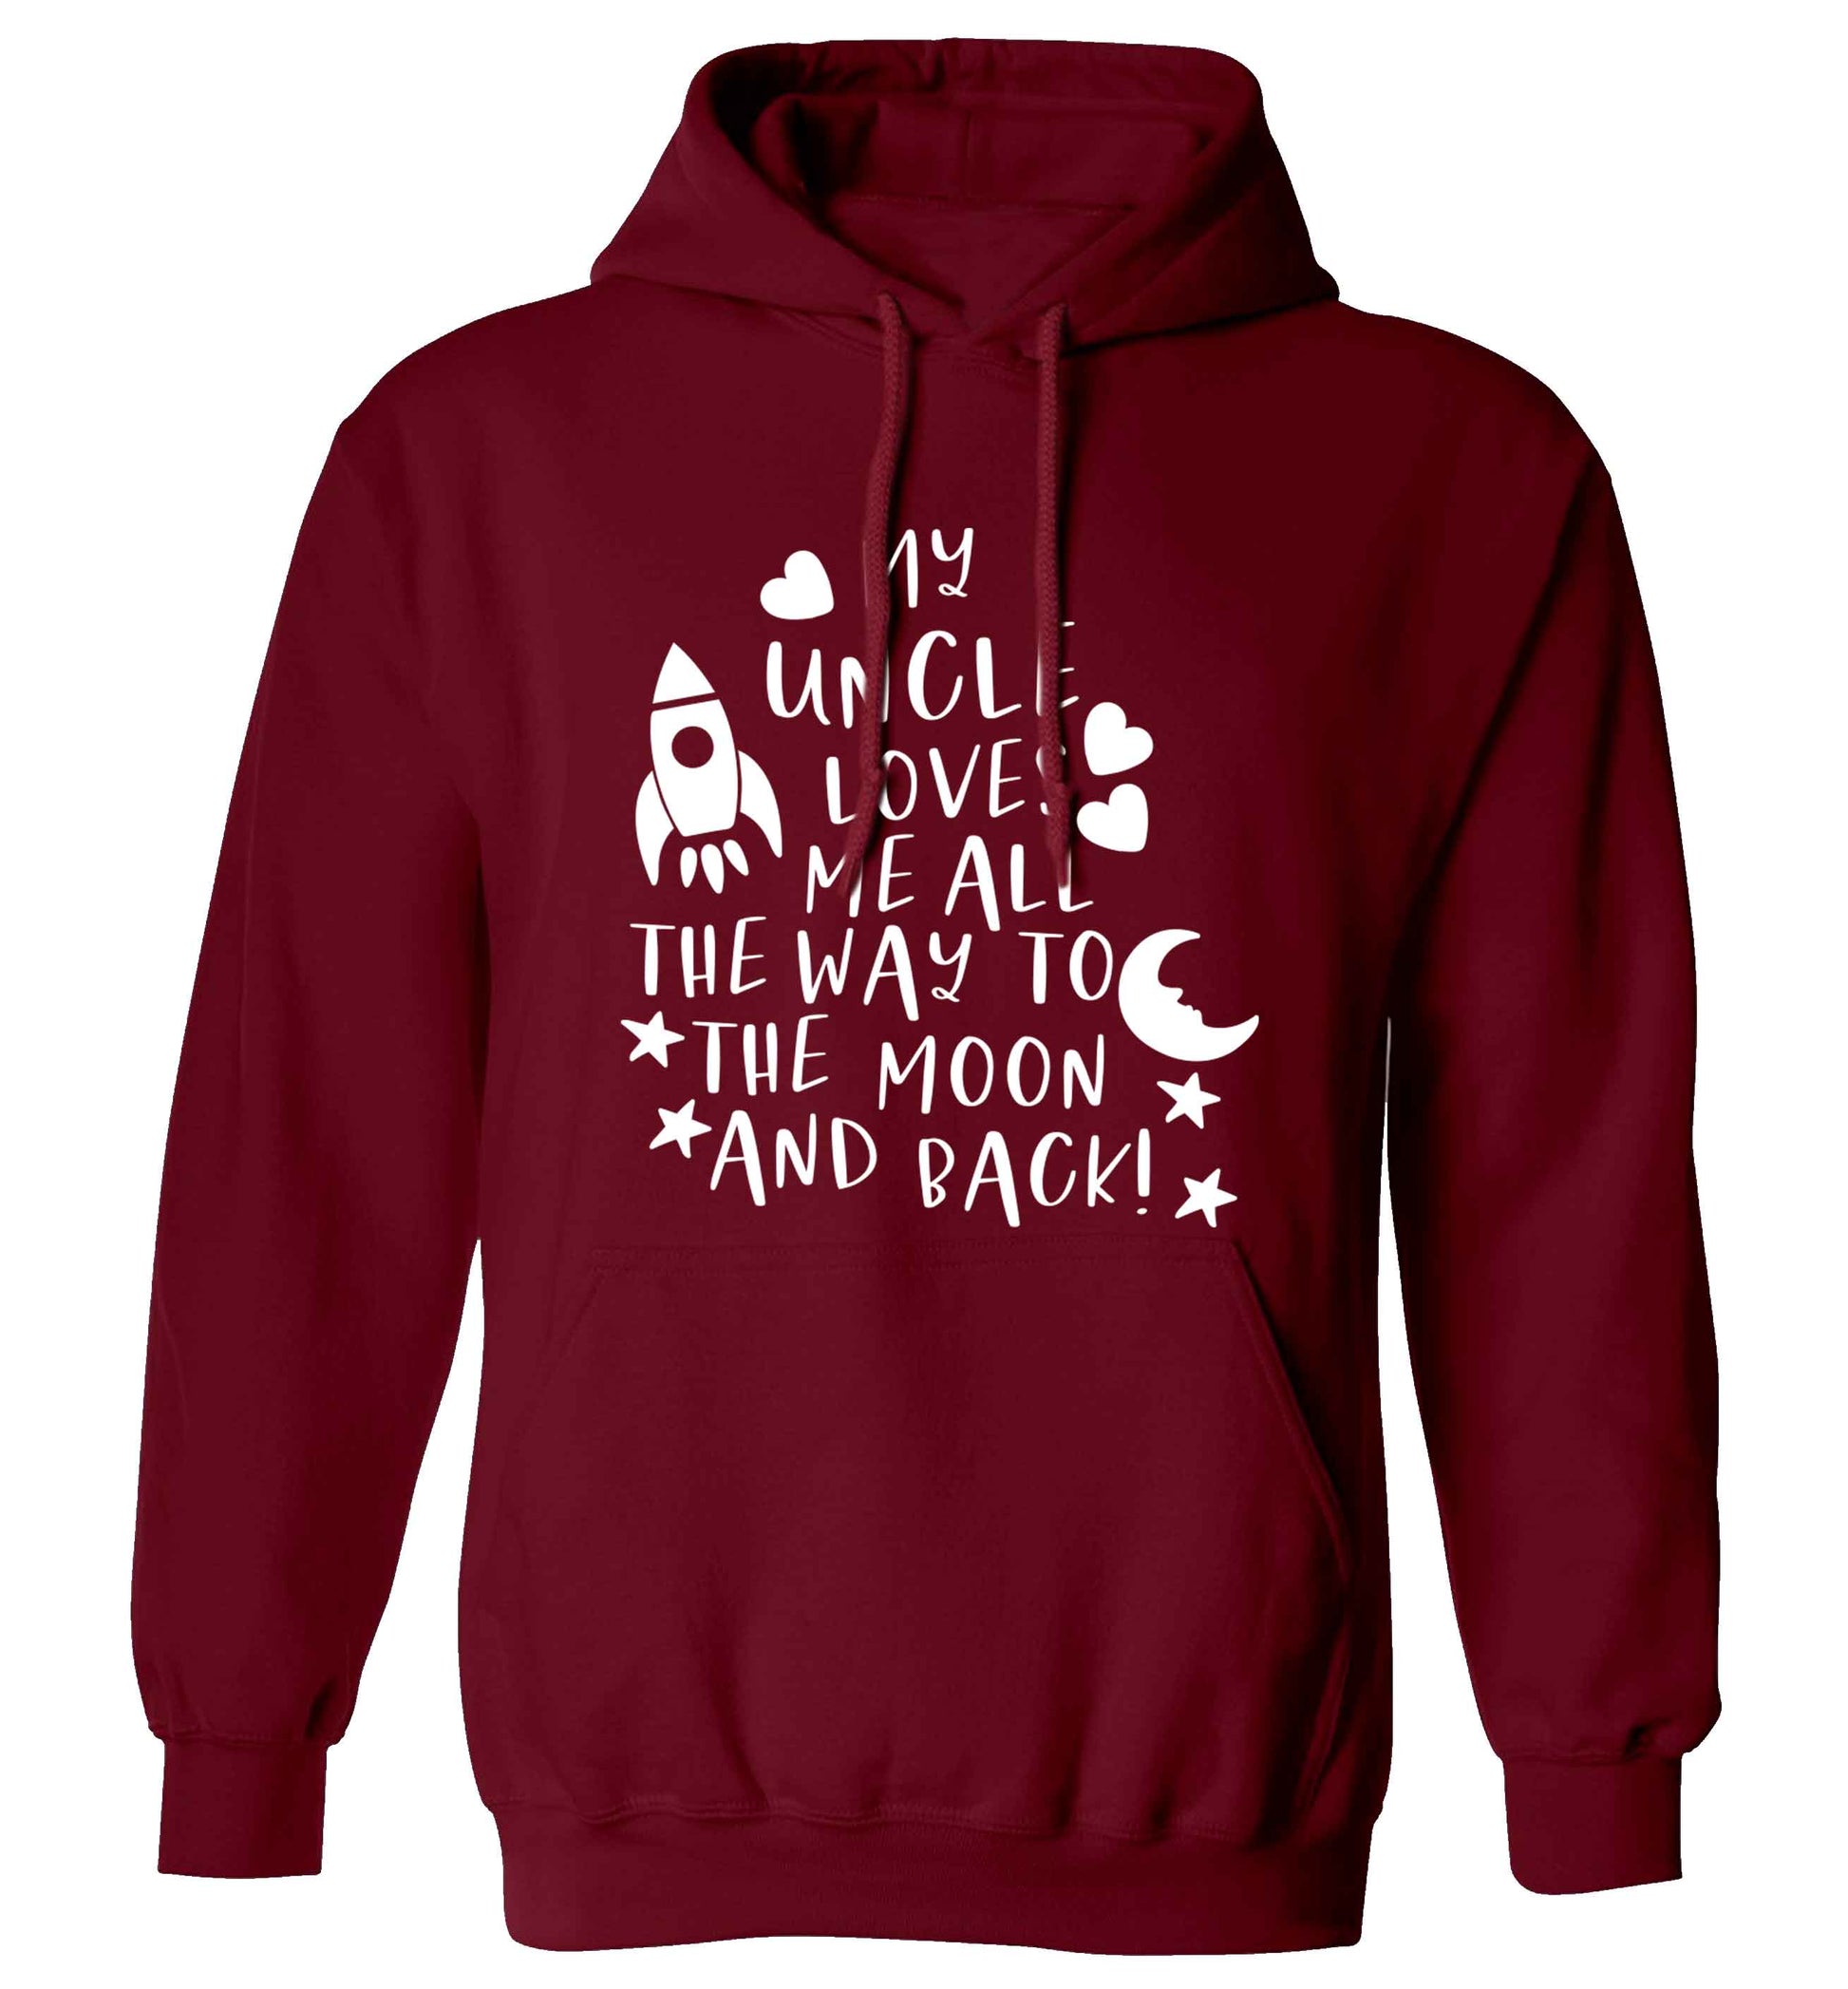 My uncle loves me all the way to the moon and back adults unisex maroon hoodie 2XL